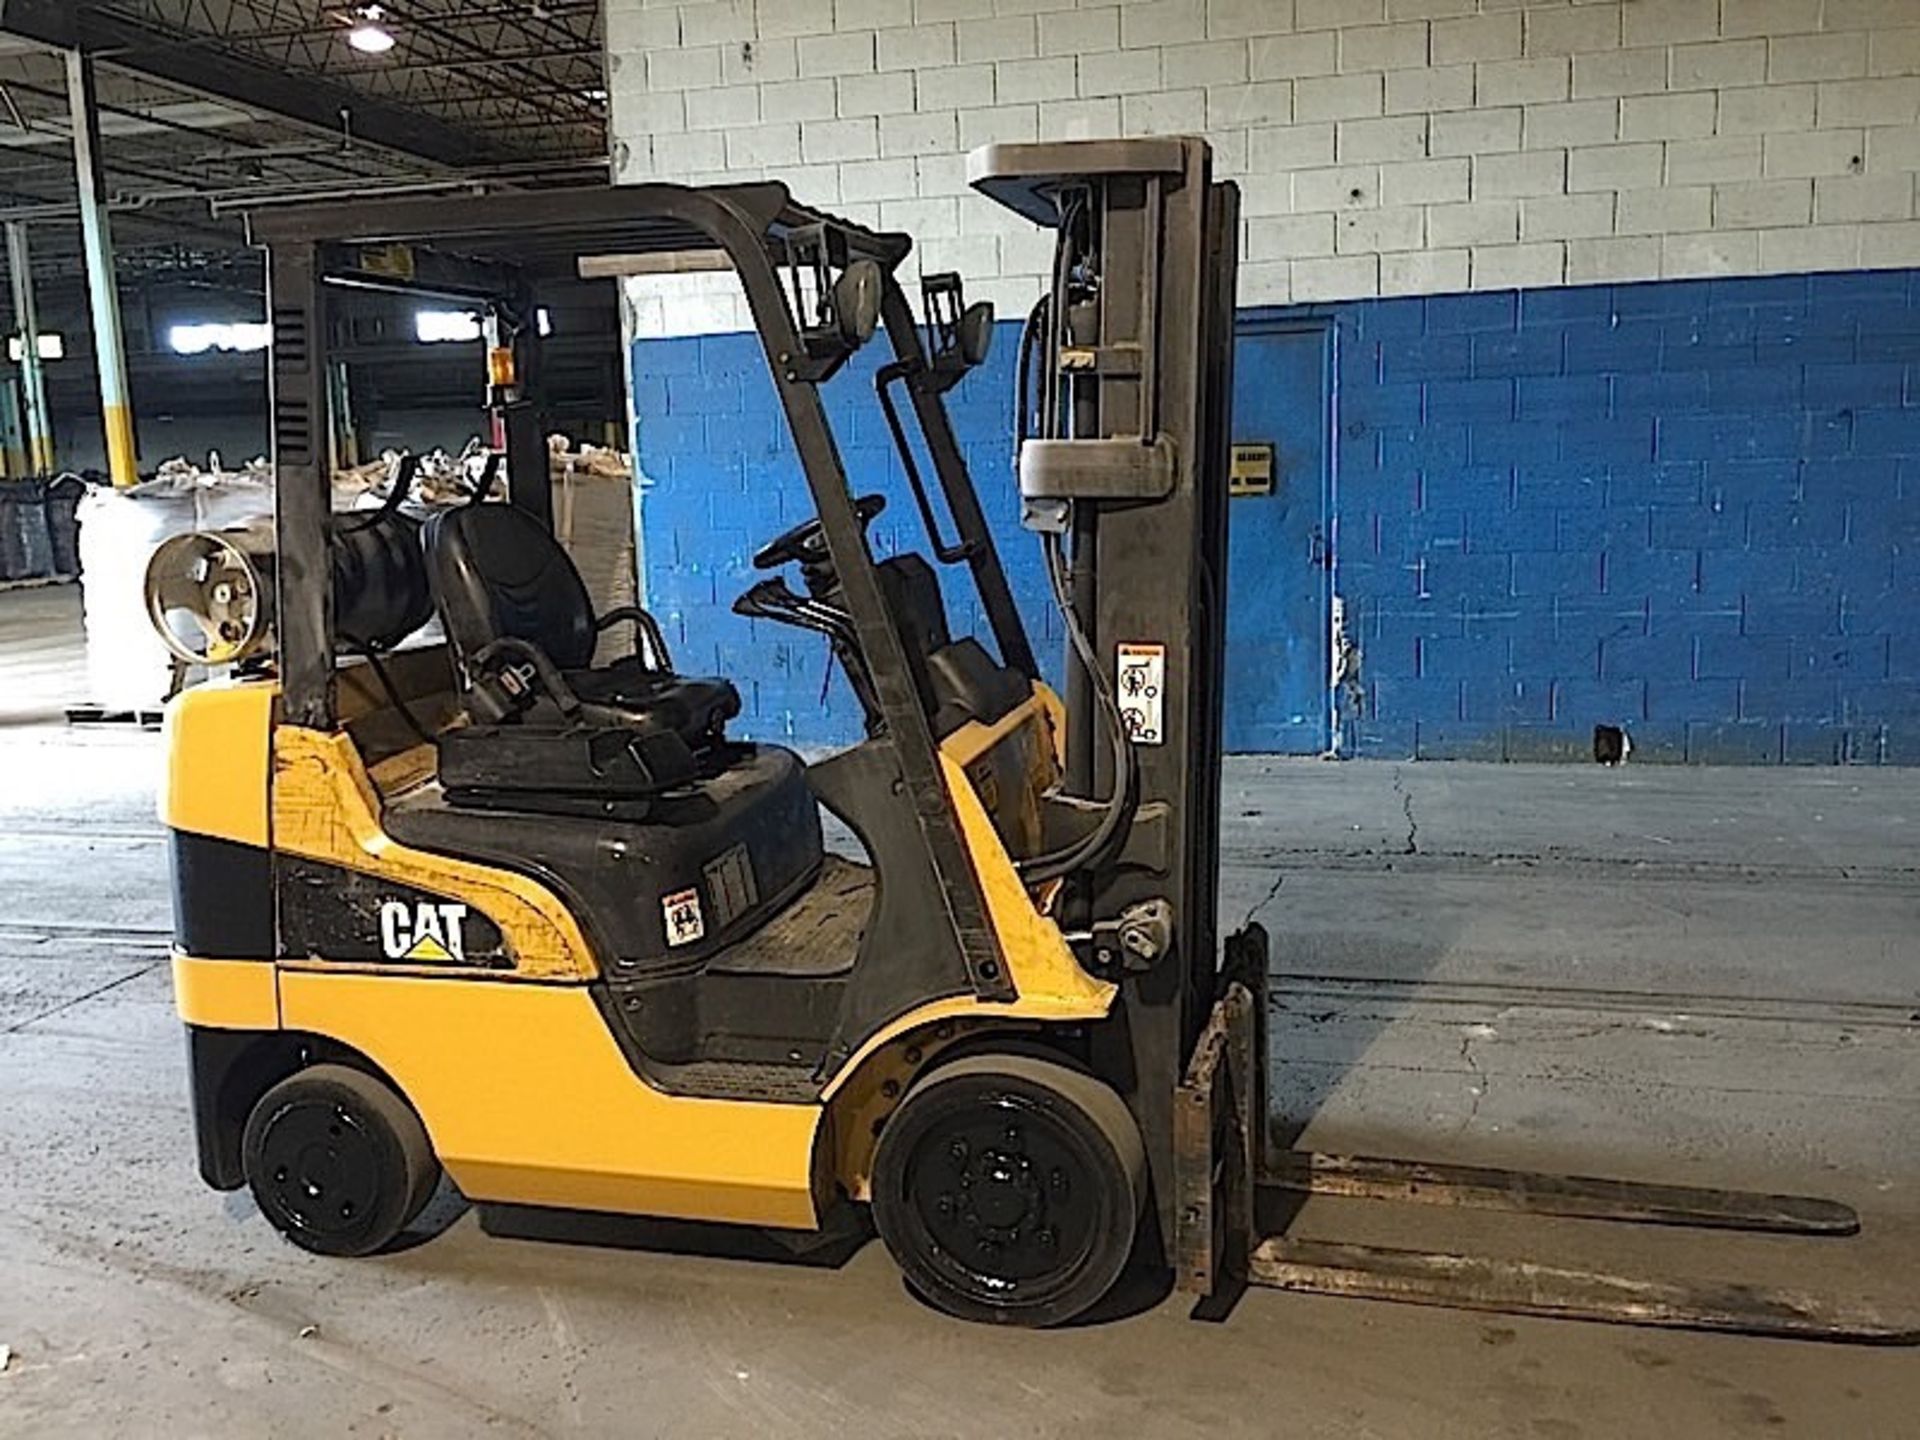 CATERPILLAR (C5000) FORKLIFT - 5,000 LBS CAPACITY, 3 STAGE, LPG WITH SIDE SHIFT